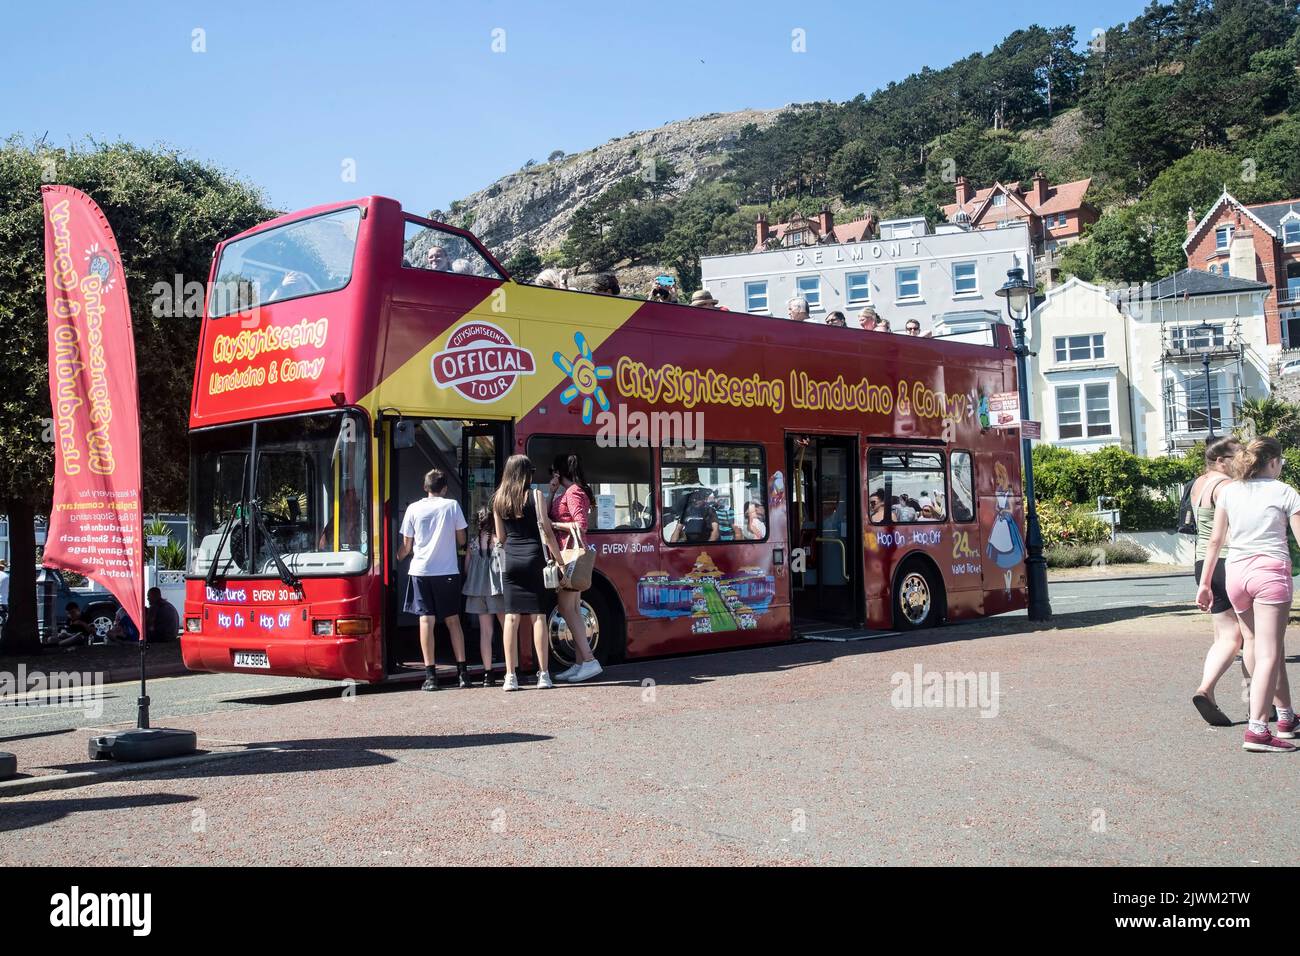 Llandudno sightseeing bus adjacent to the pier offering hop on-hop off bus tours of the town and surrounds for visitors and tourists Stock Photo